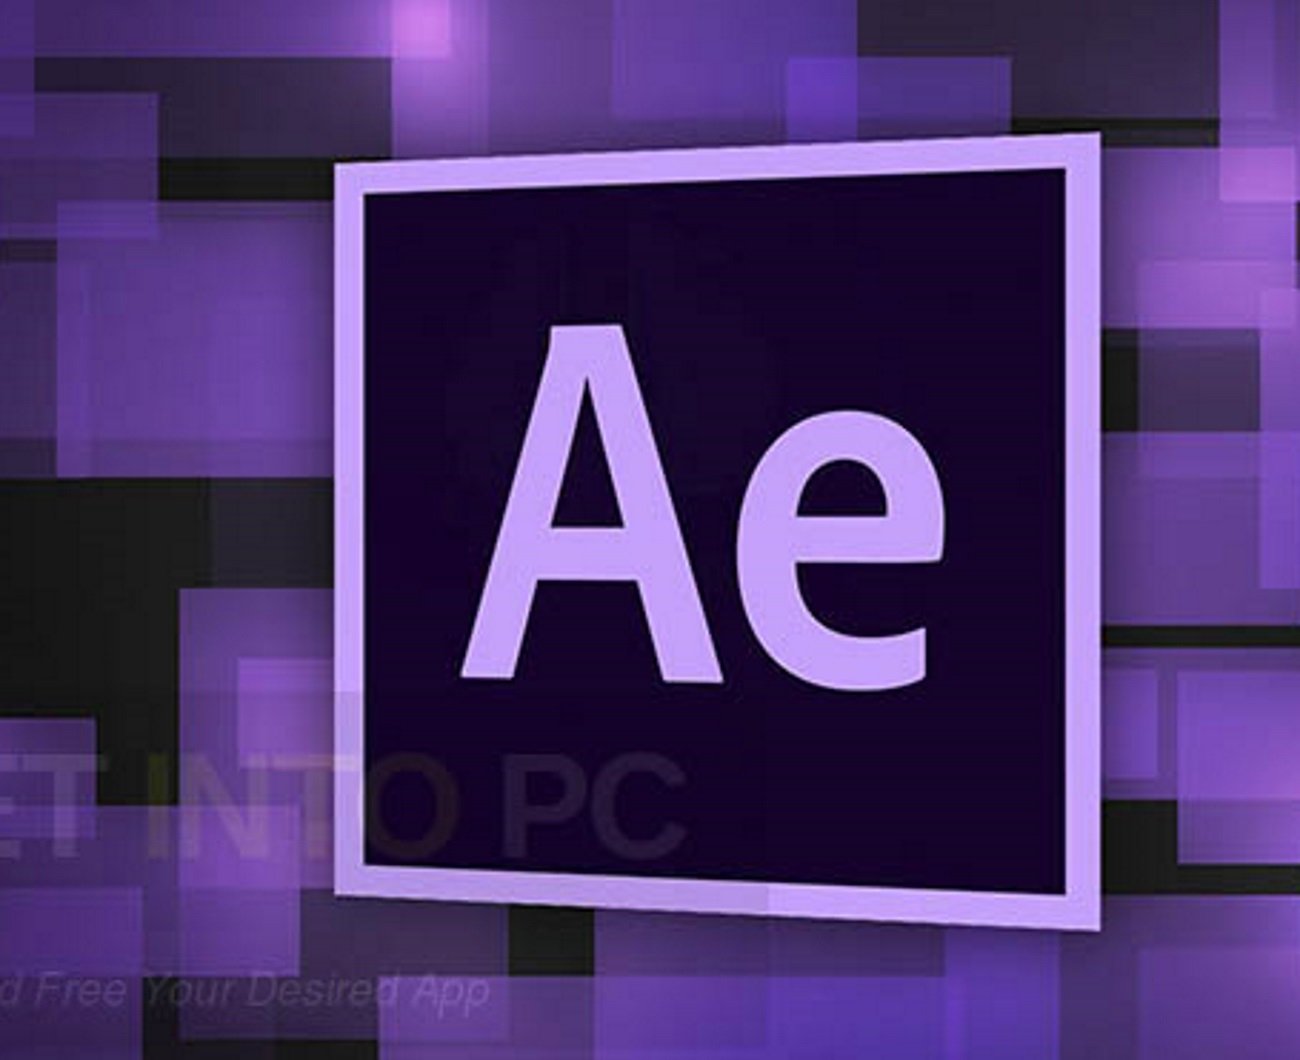 After effects работа. Афтер эффект. Adobe after. Логотип Афтер эффект. Adobe after Effects картинки.